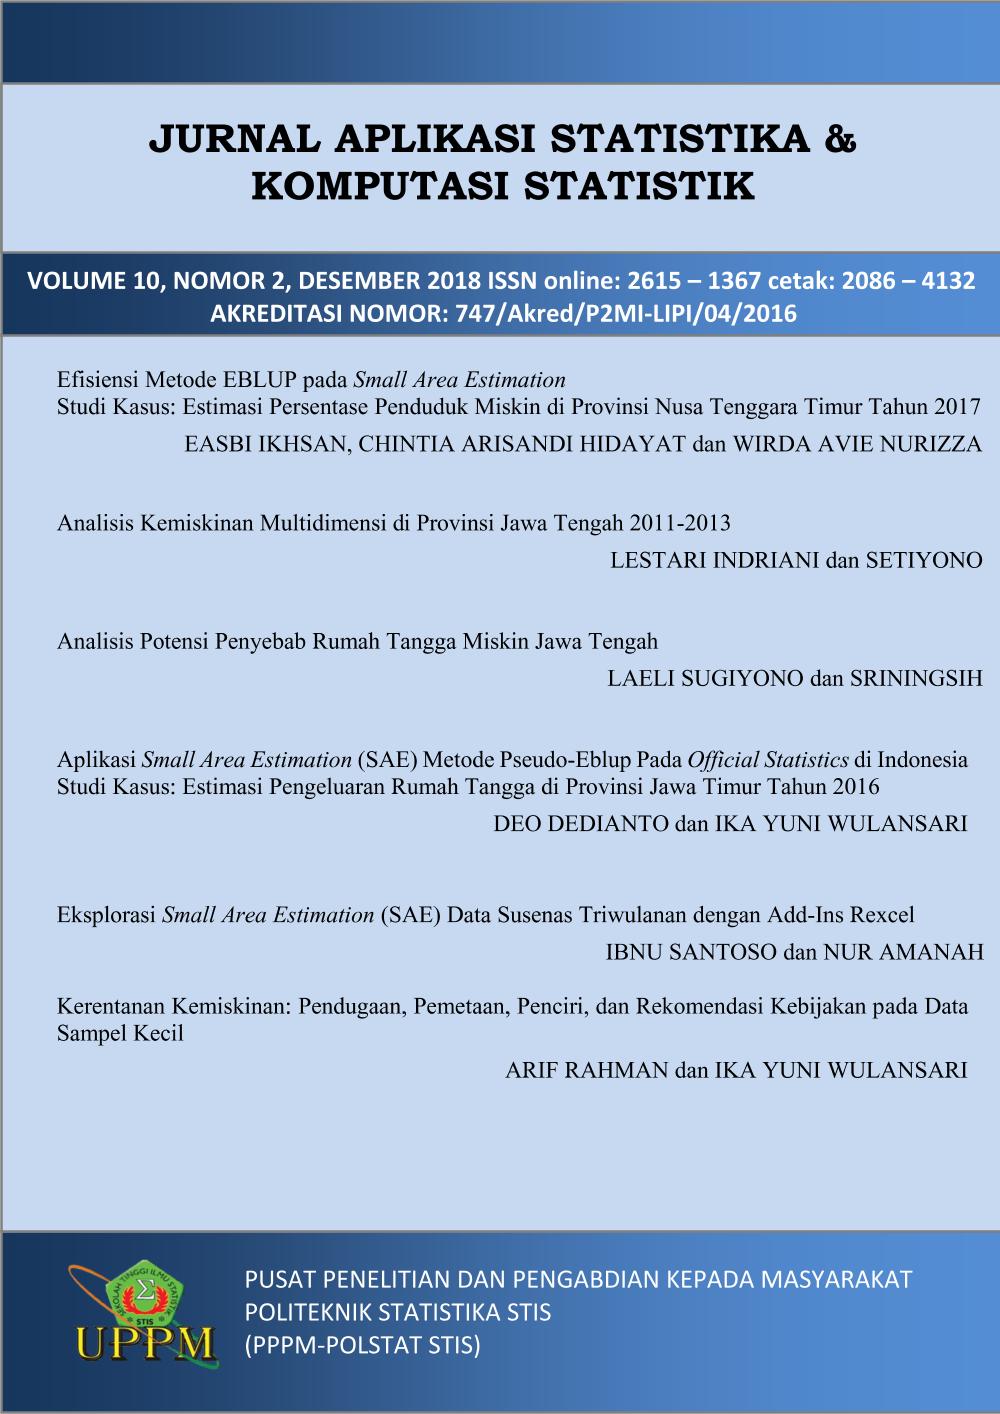 					View Vol. 10 No. 2 (2018): Journal of Statistical Application and Computational Statistics
				